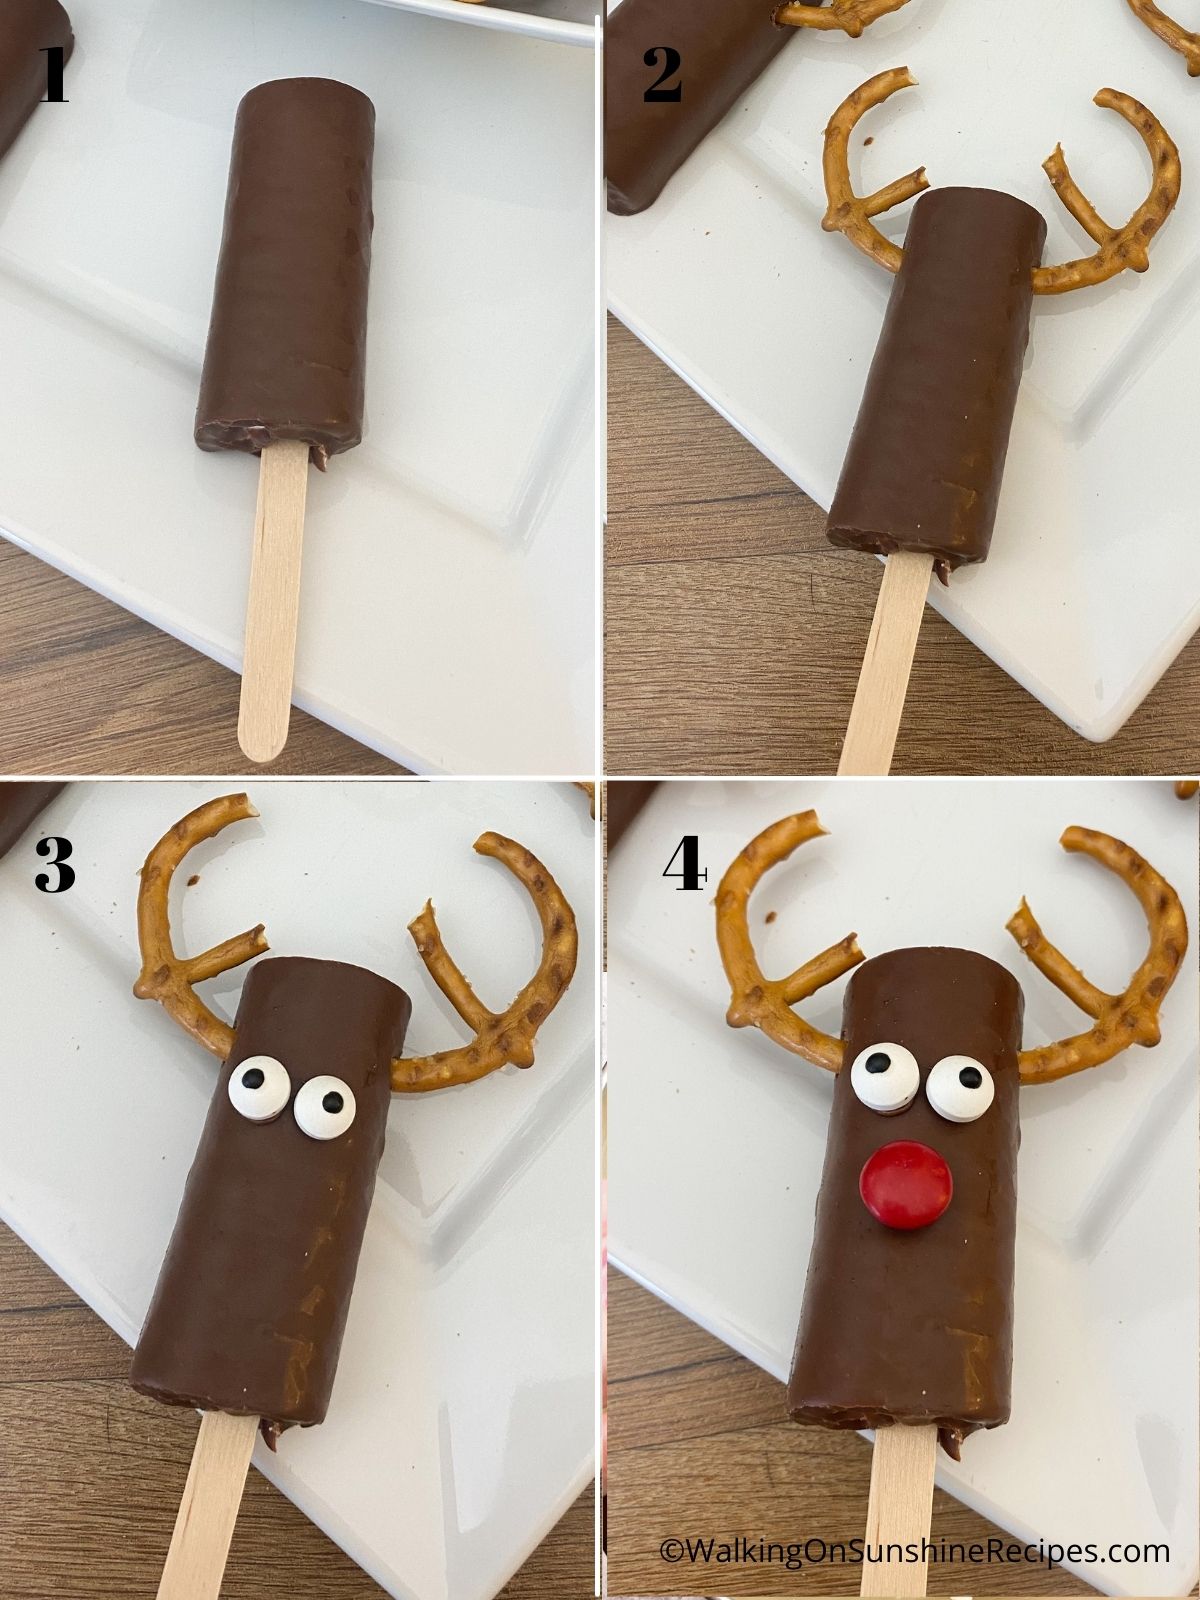 Process for making Reindeer Cakes on a stick.